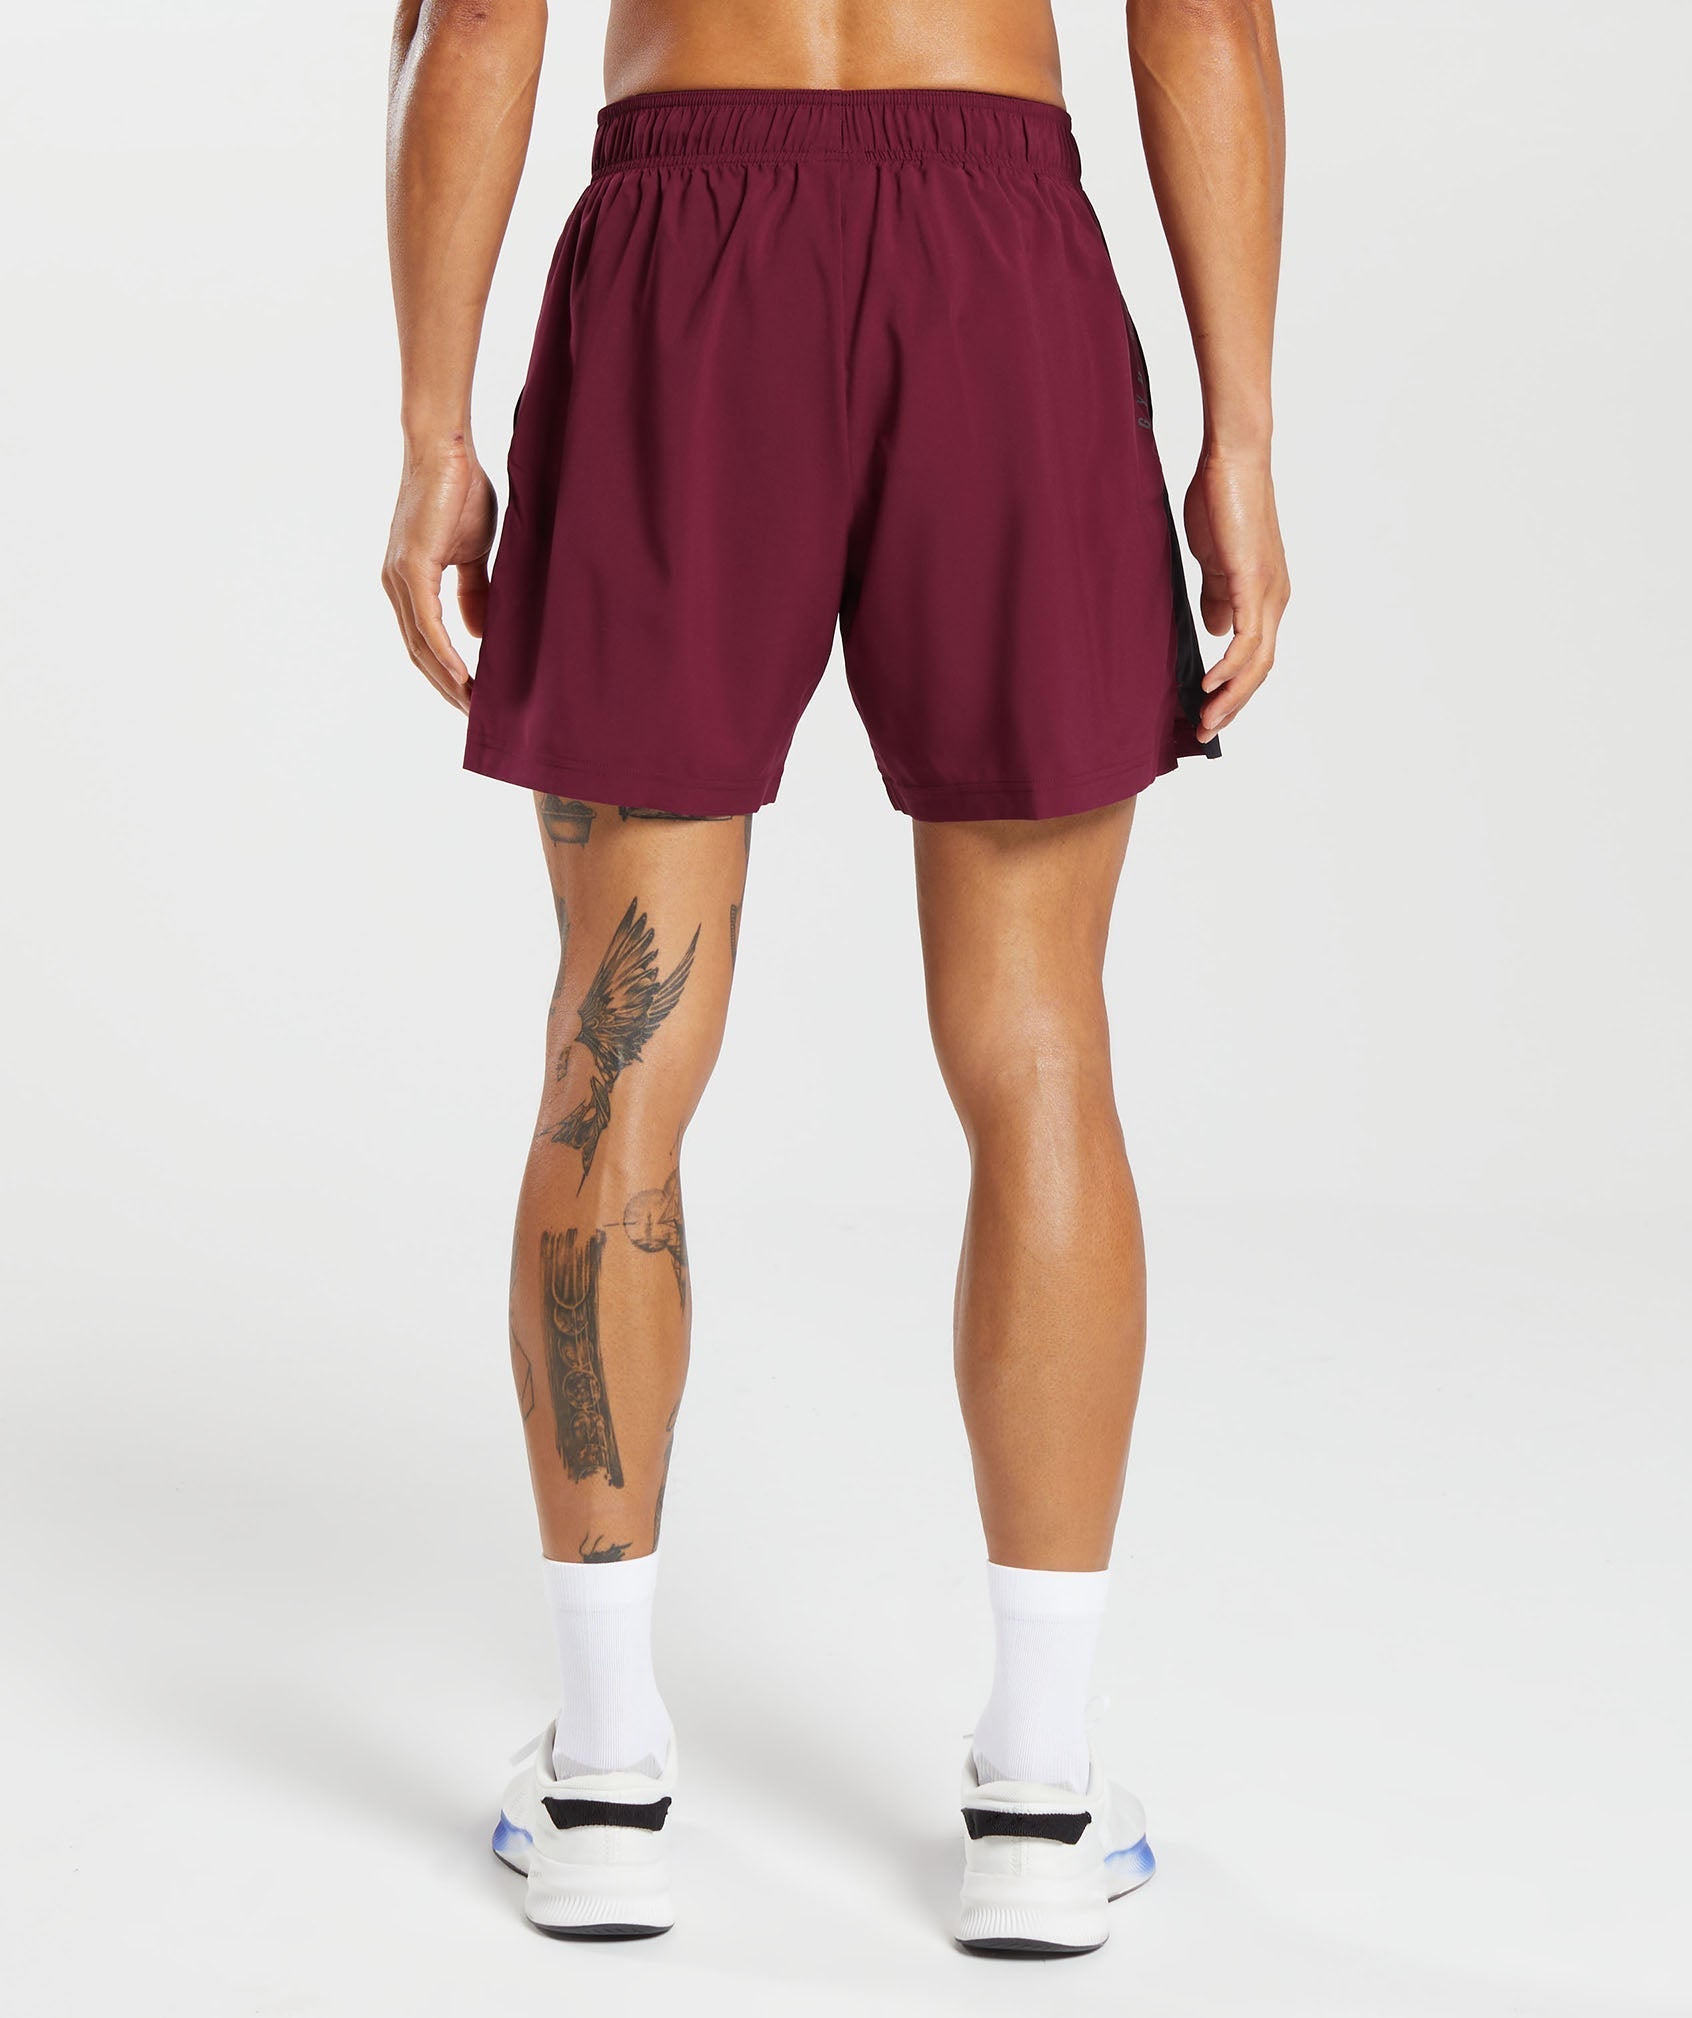 Sport  7" Shorts in Plum Pink/Black - view 2